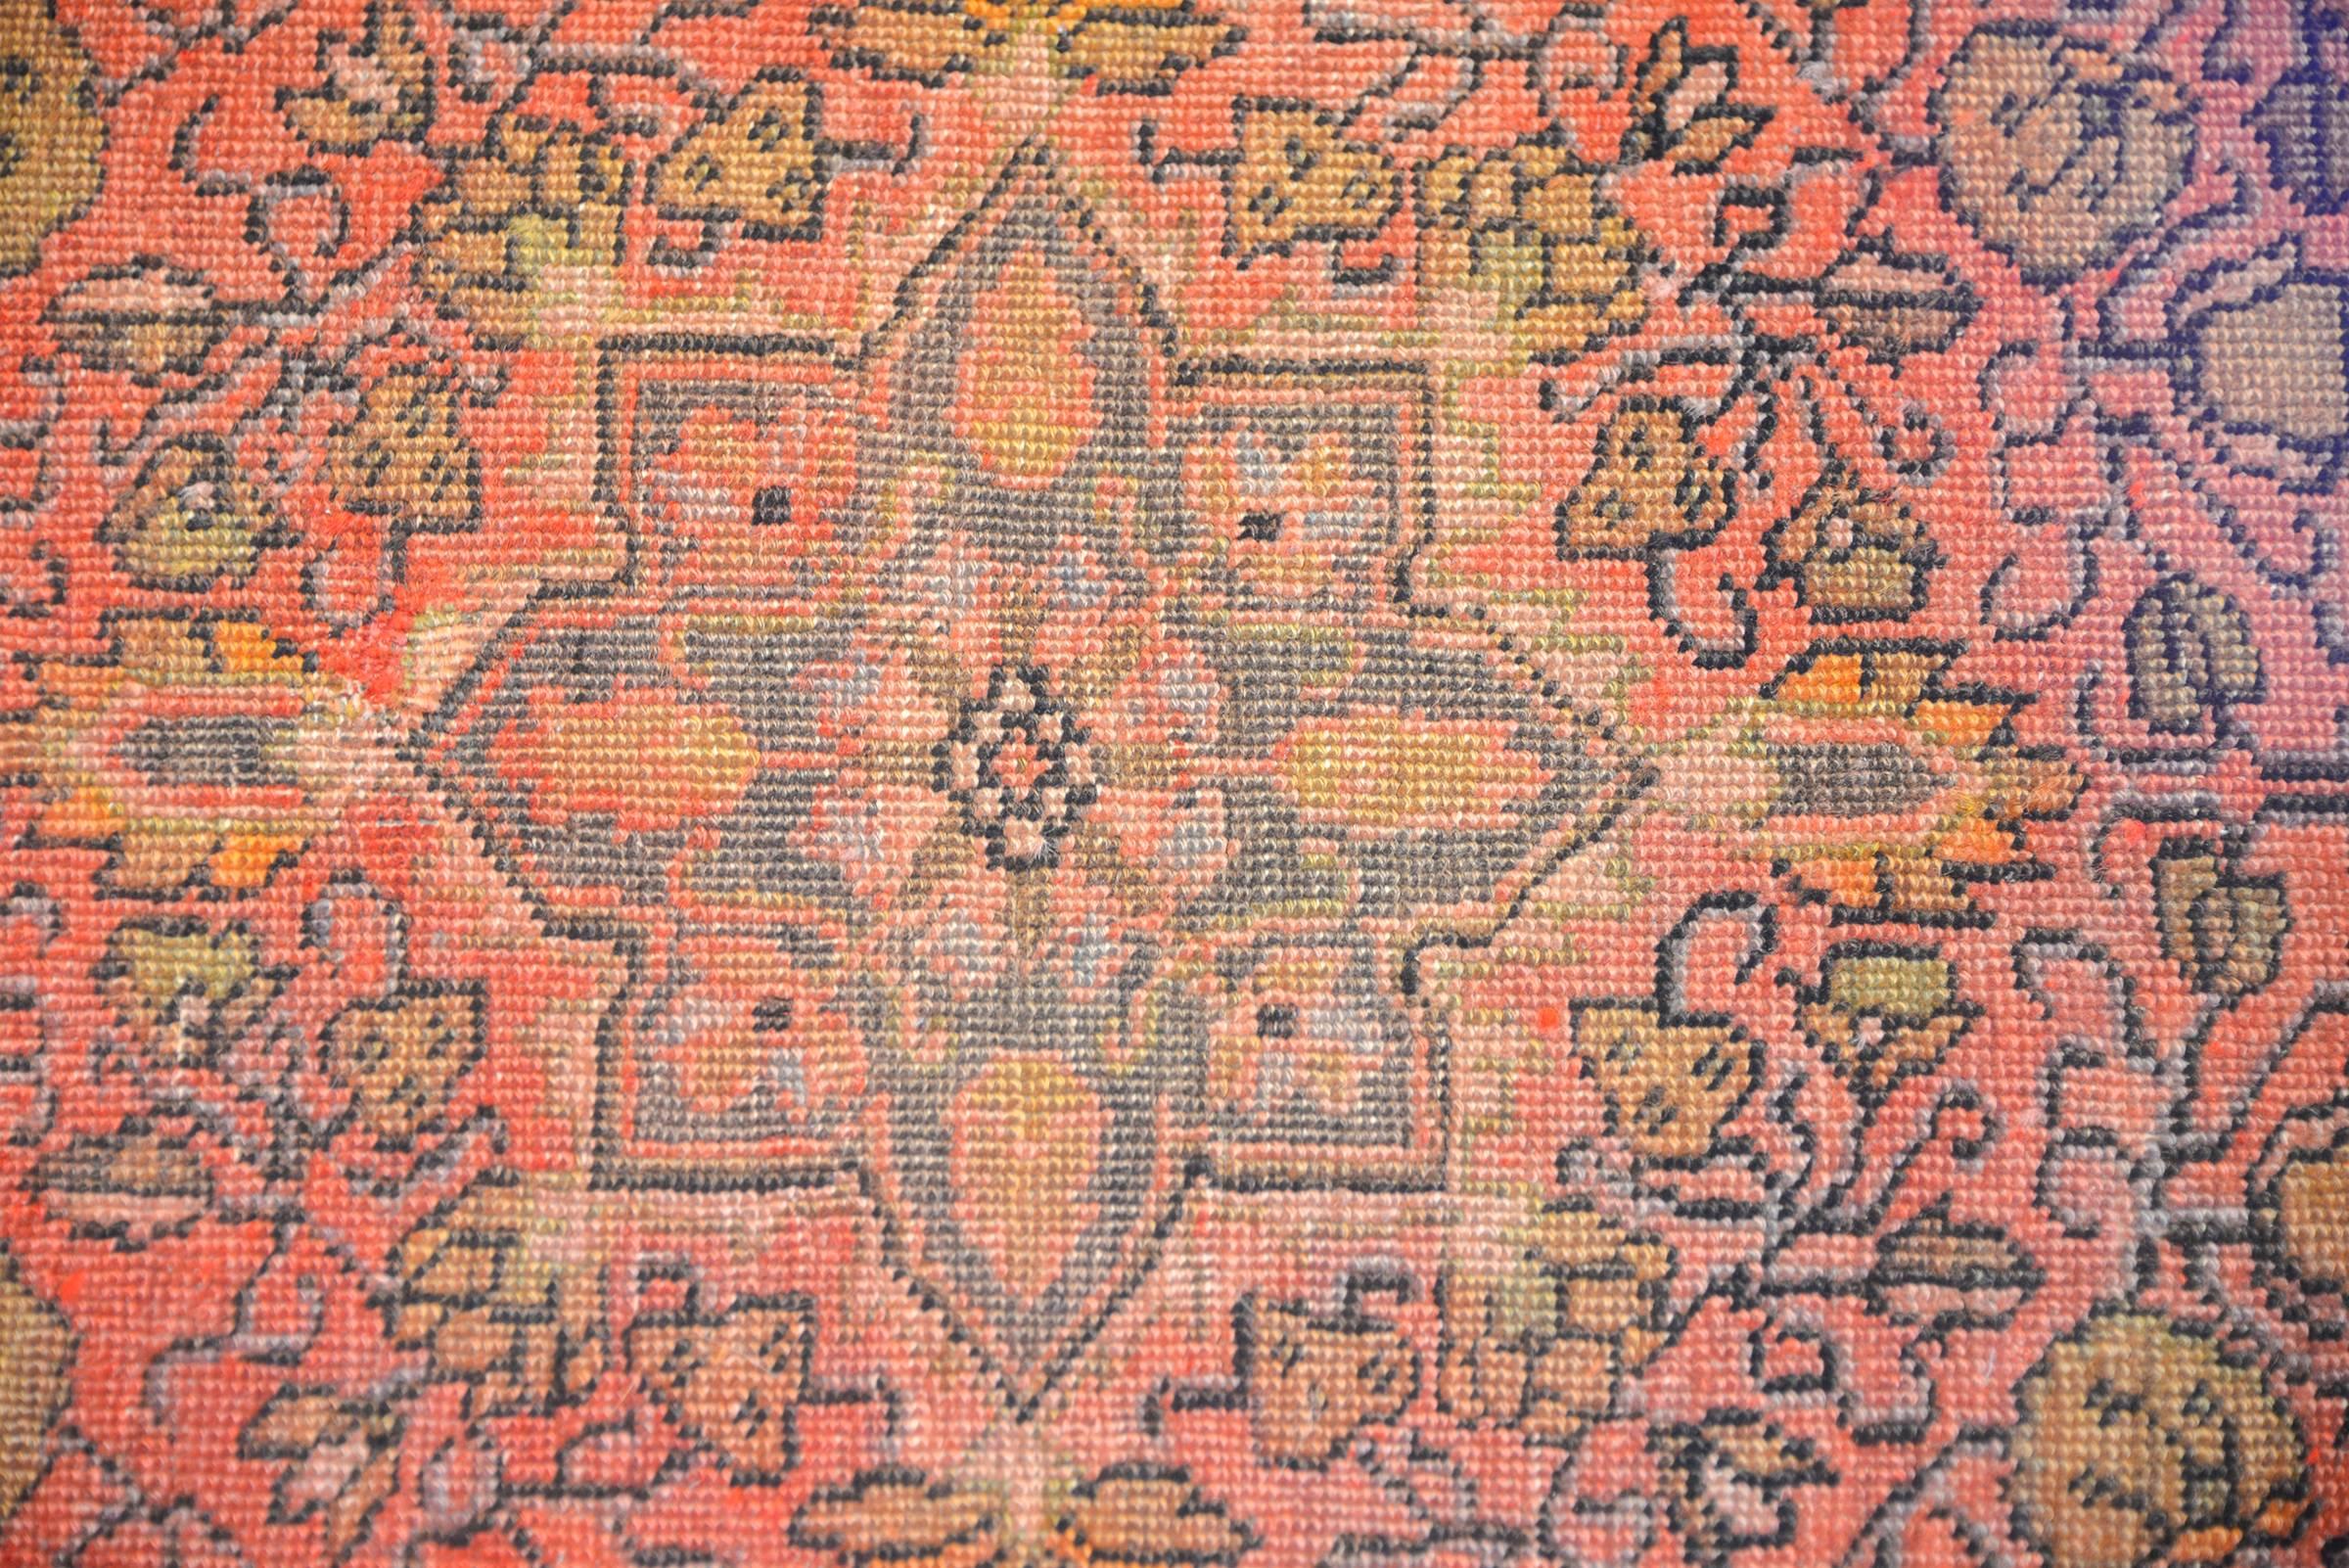 An amazing circa 1920 Persian Sarouk Farahan rug with a wonderfully stylized floral pattern woven with natural vegetable dyed wool. The large eight-lobed floral medallion lives on a pale crimson field of multicolored flowers and vines. The border is